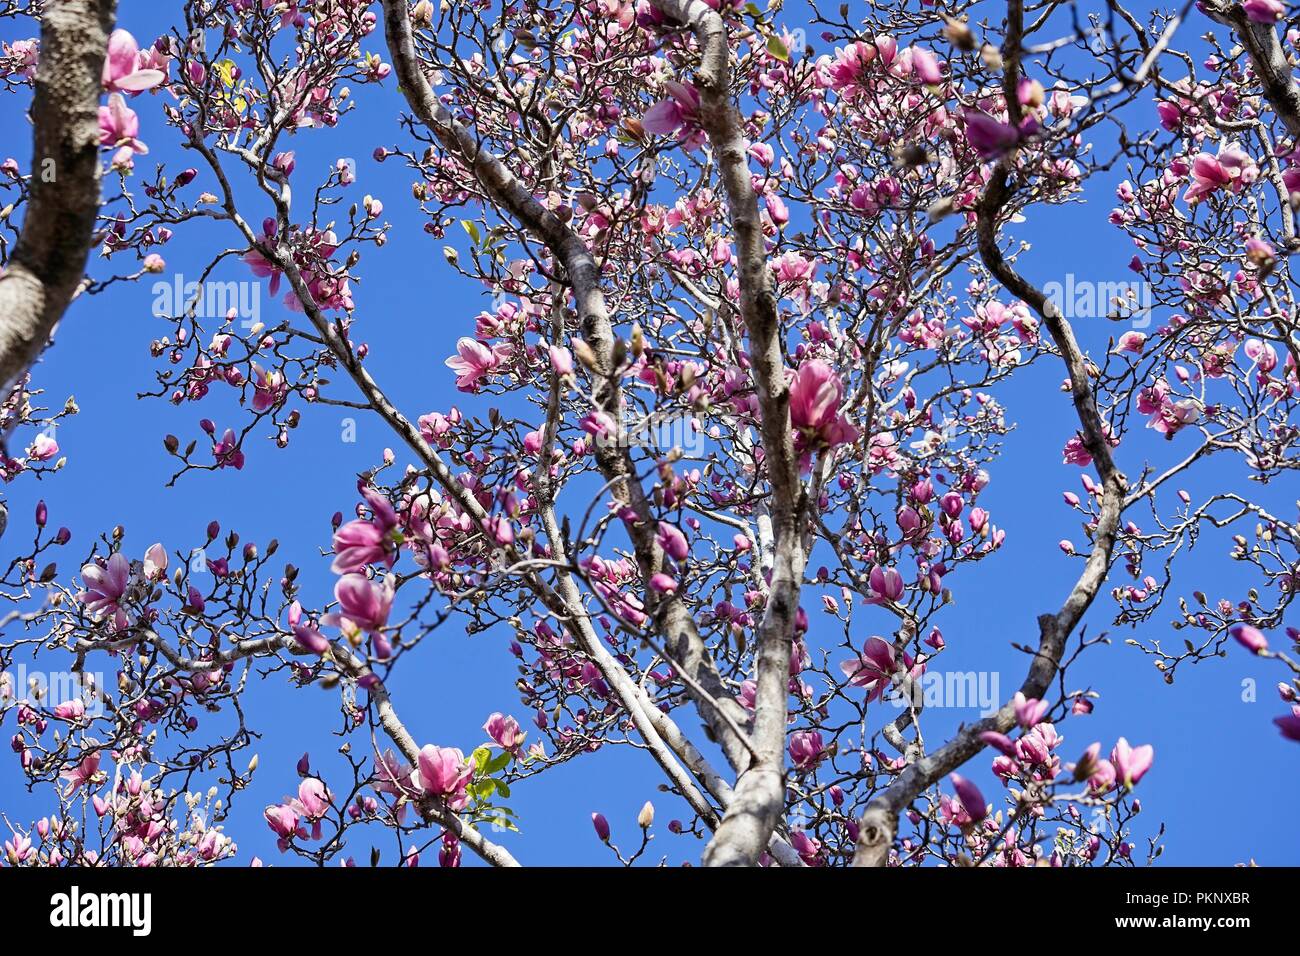 Looking up into the canopy of a large Magnolia tree, filled with bright pink flowers and buds. Stock Photo